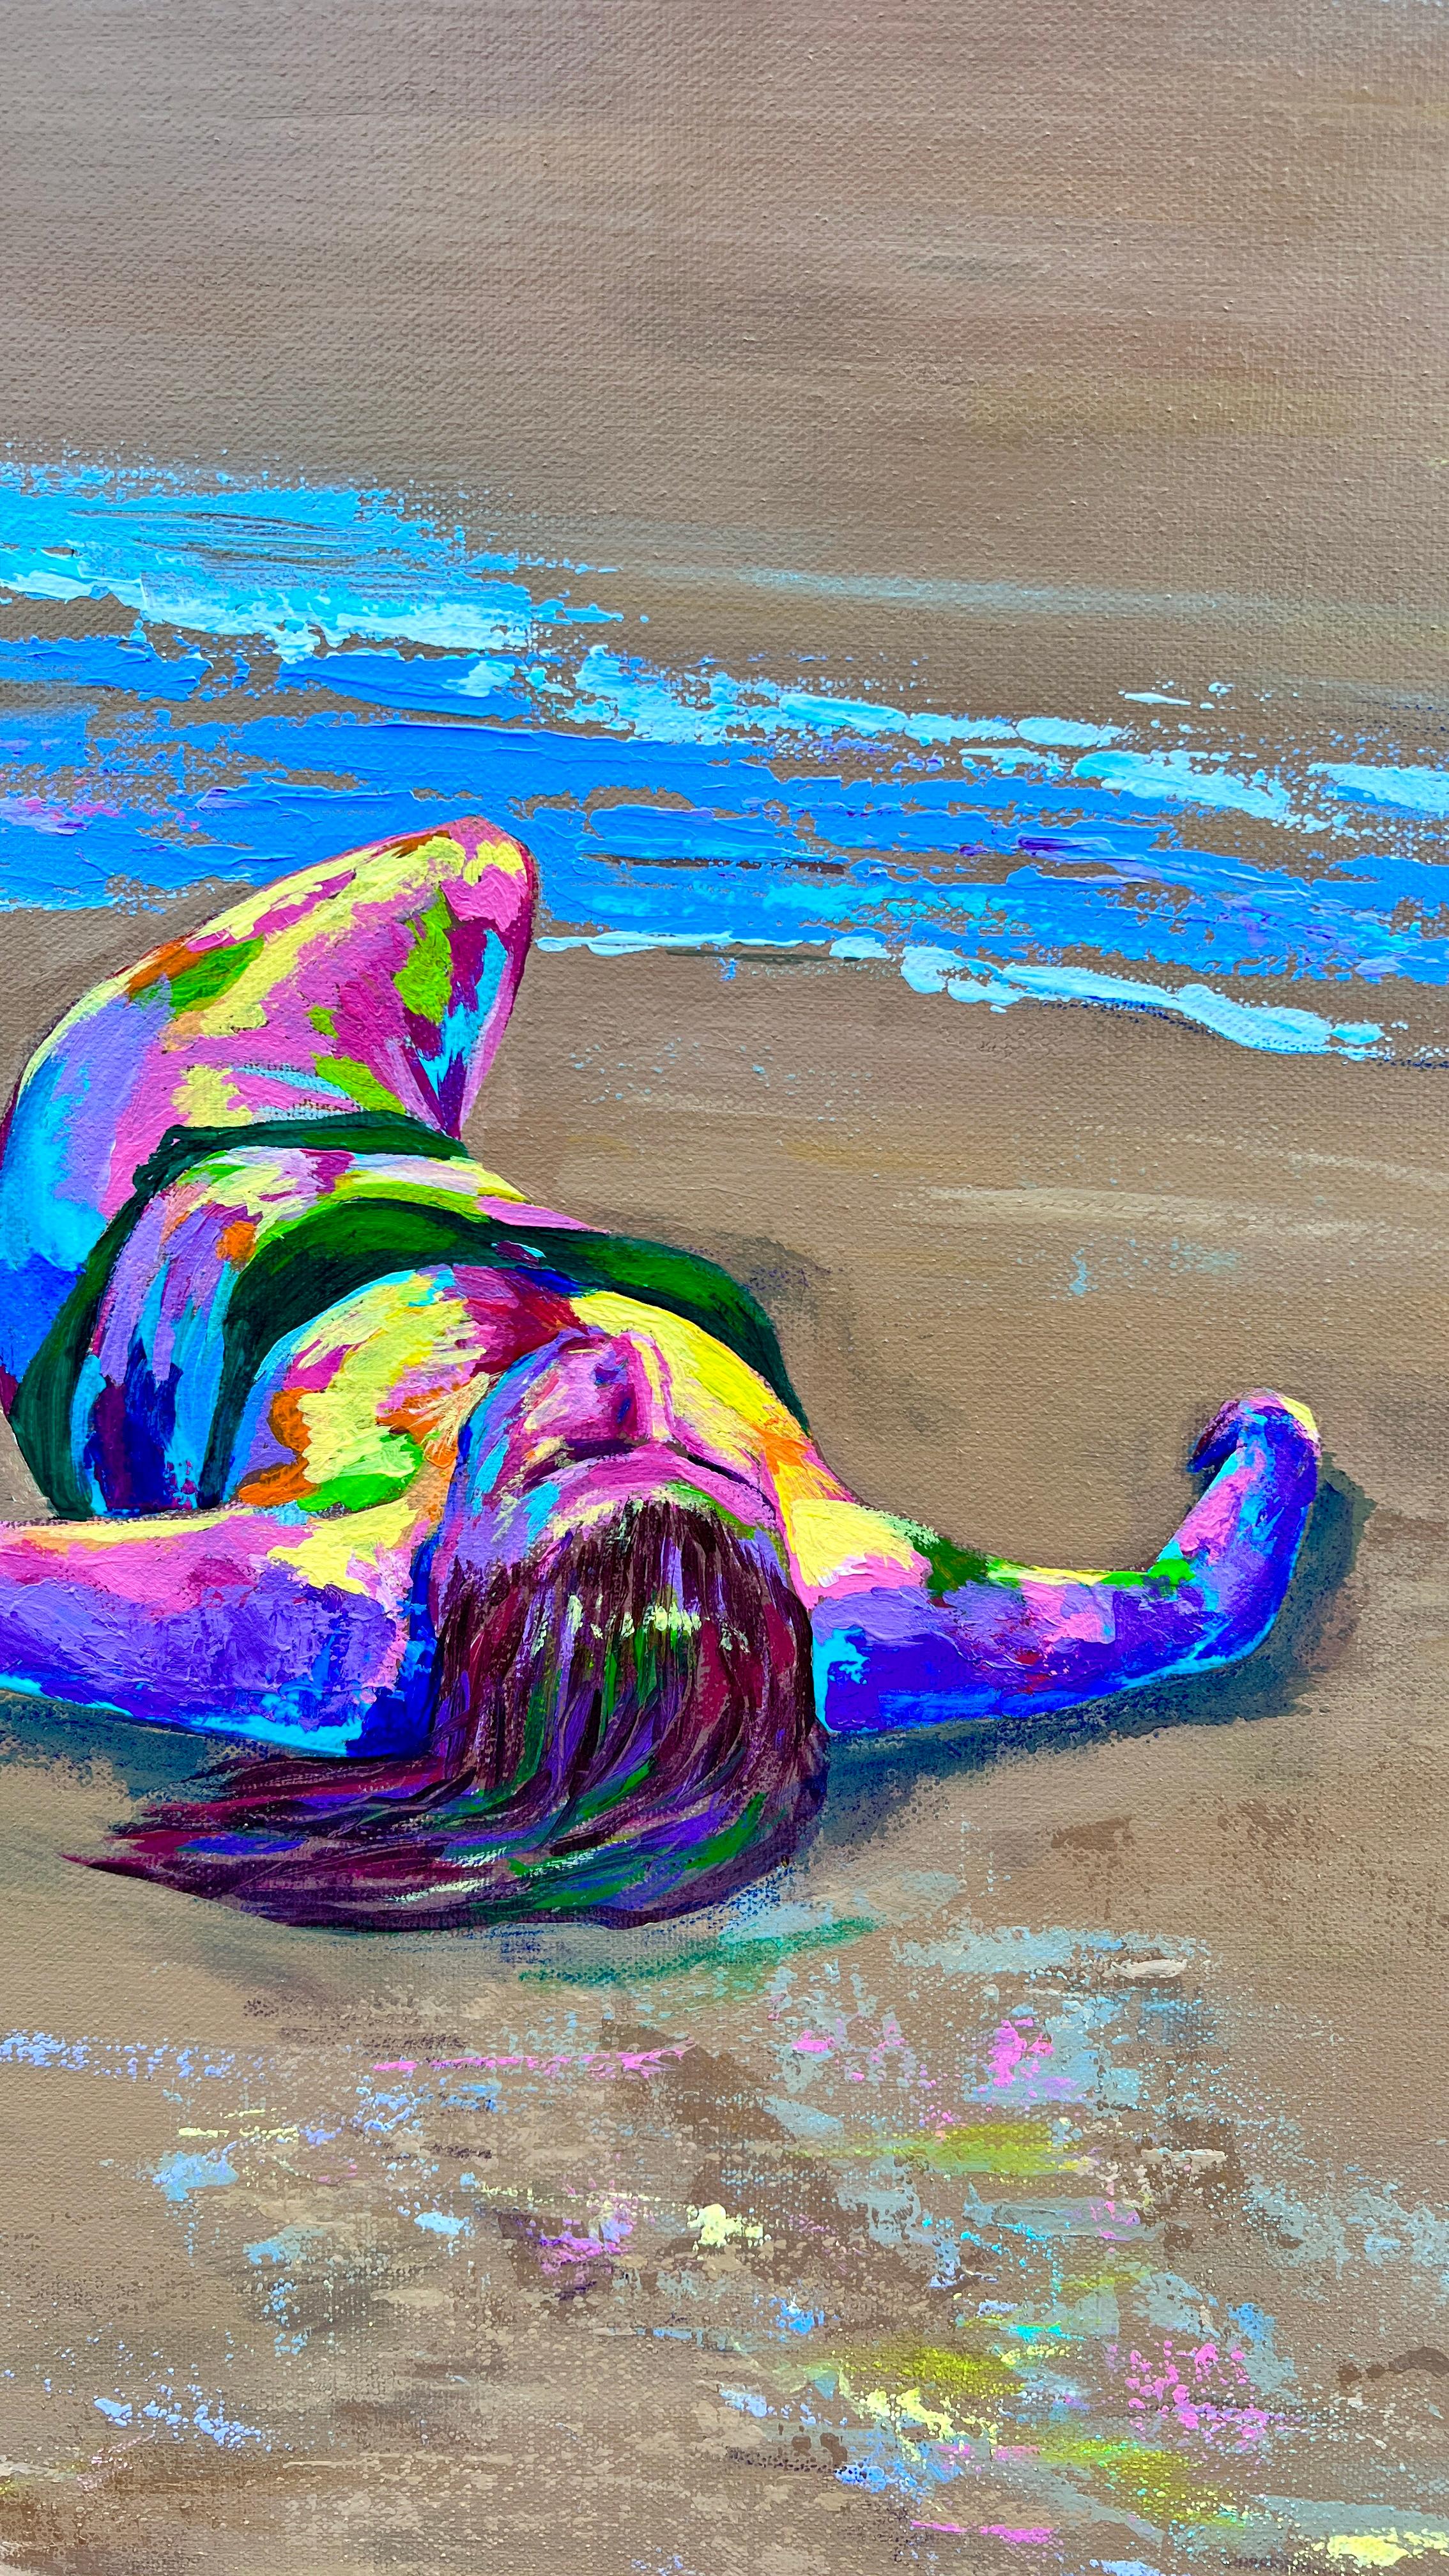 I wanna chilling on the beach - Feminist Painting by Lana Ritter